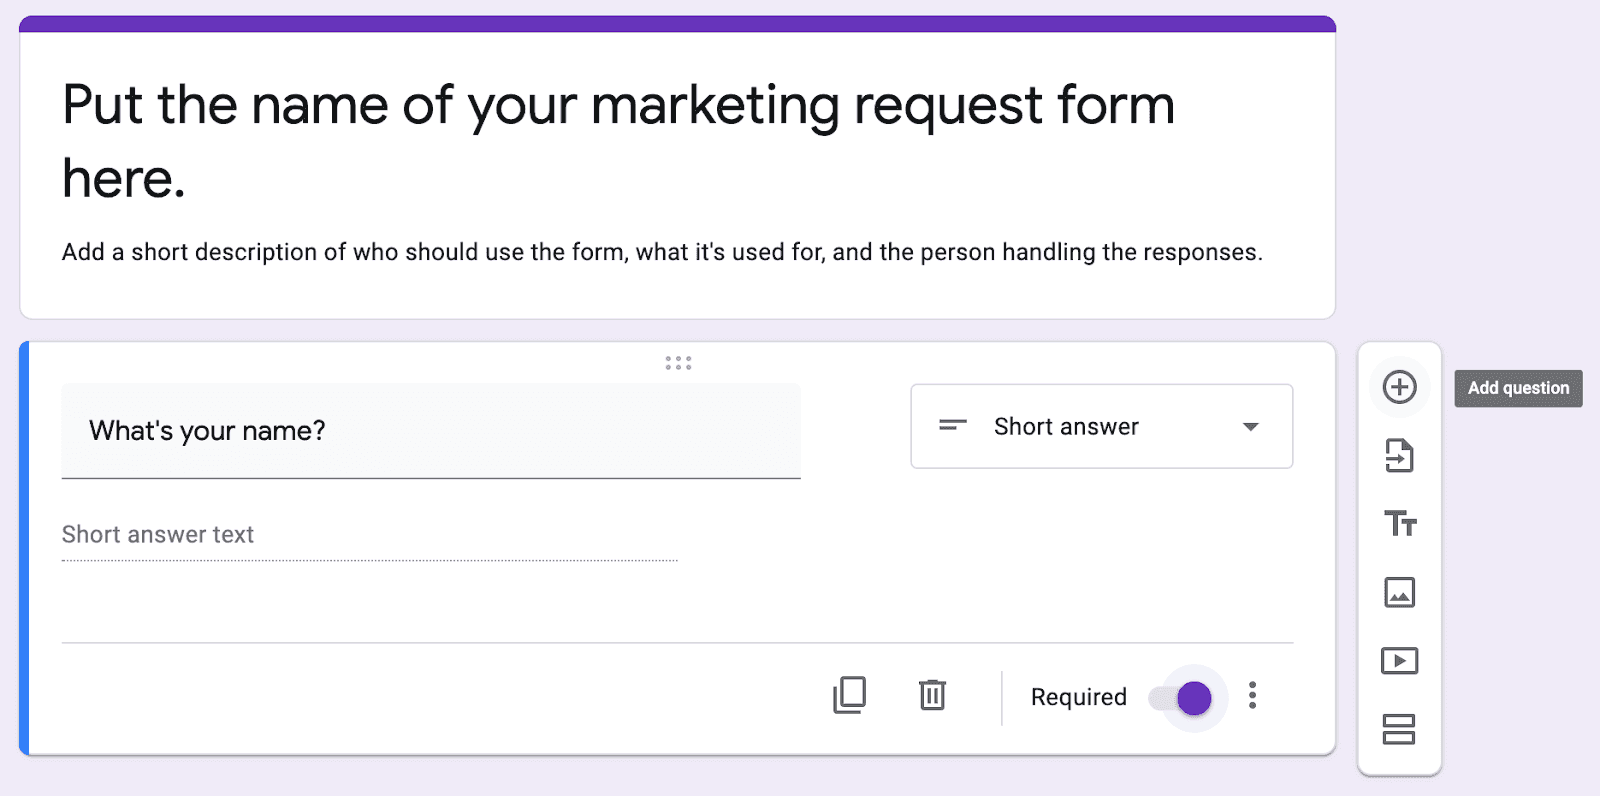 Name your marketing request.